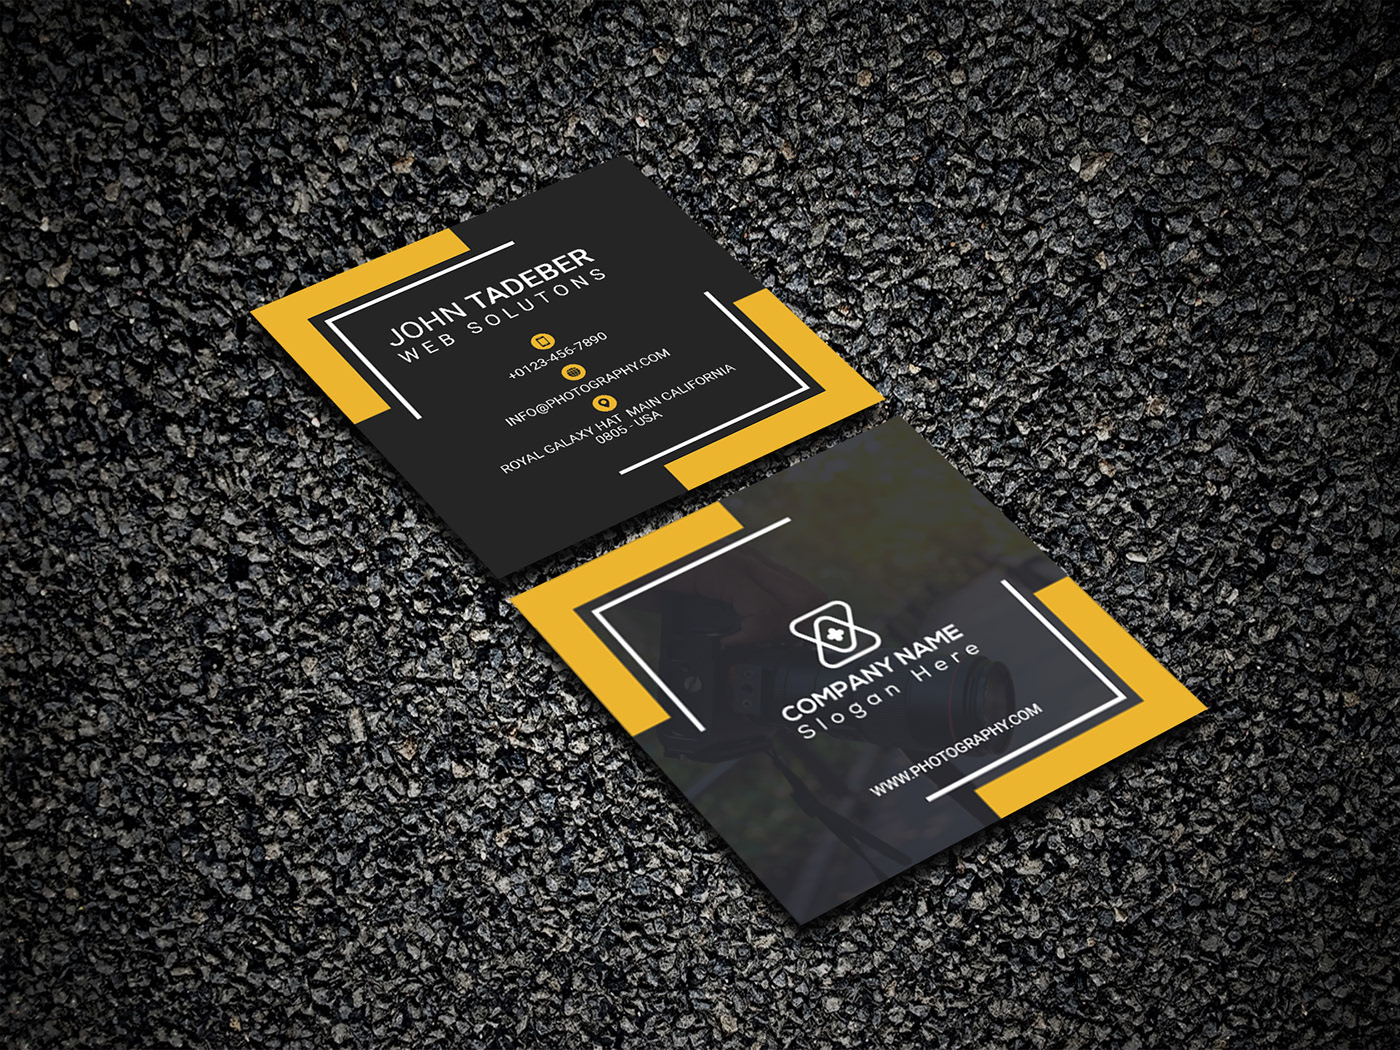 3x3 square business cards 5